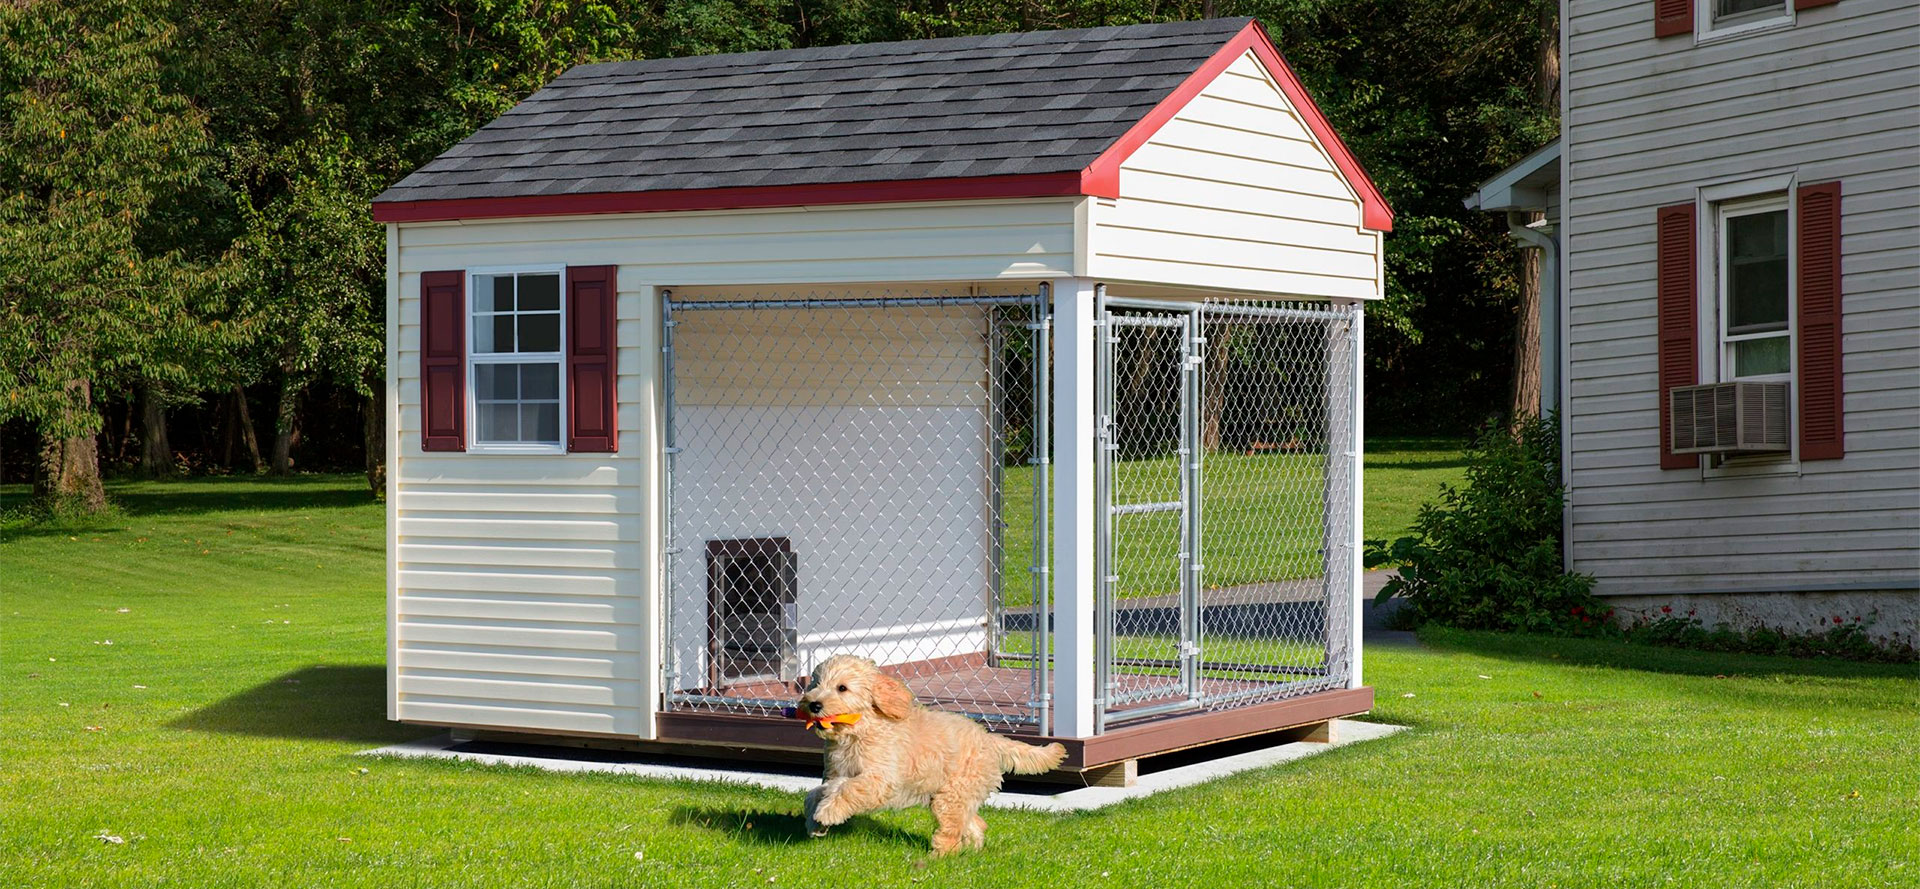 Dog and outdoor dog kennel.